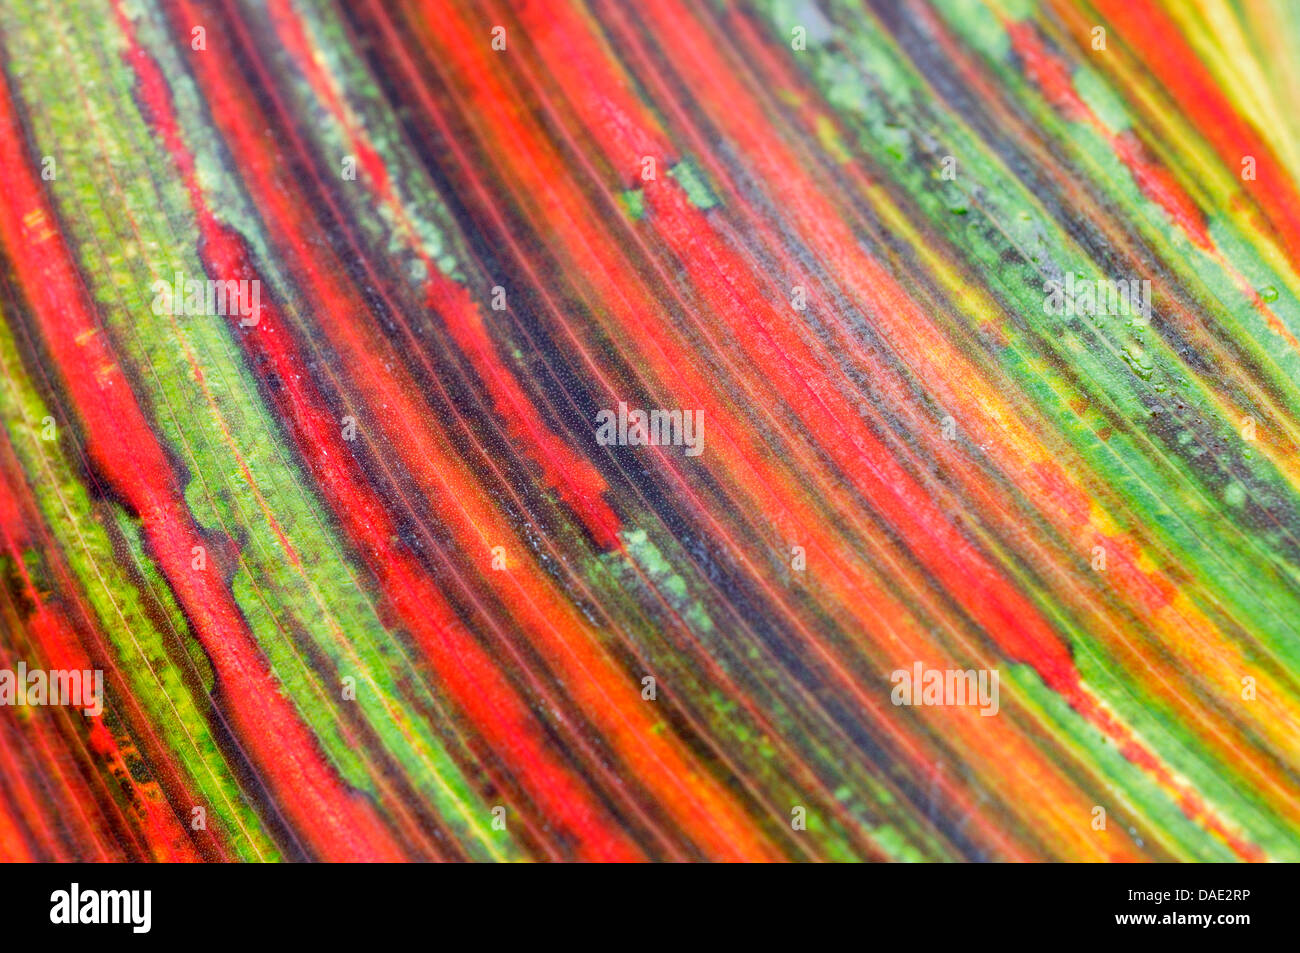 Indian shot, canna, poloke (Canna indica), section of a very colourful autumn leaf, Germany Stock Photo